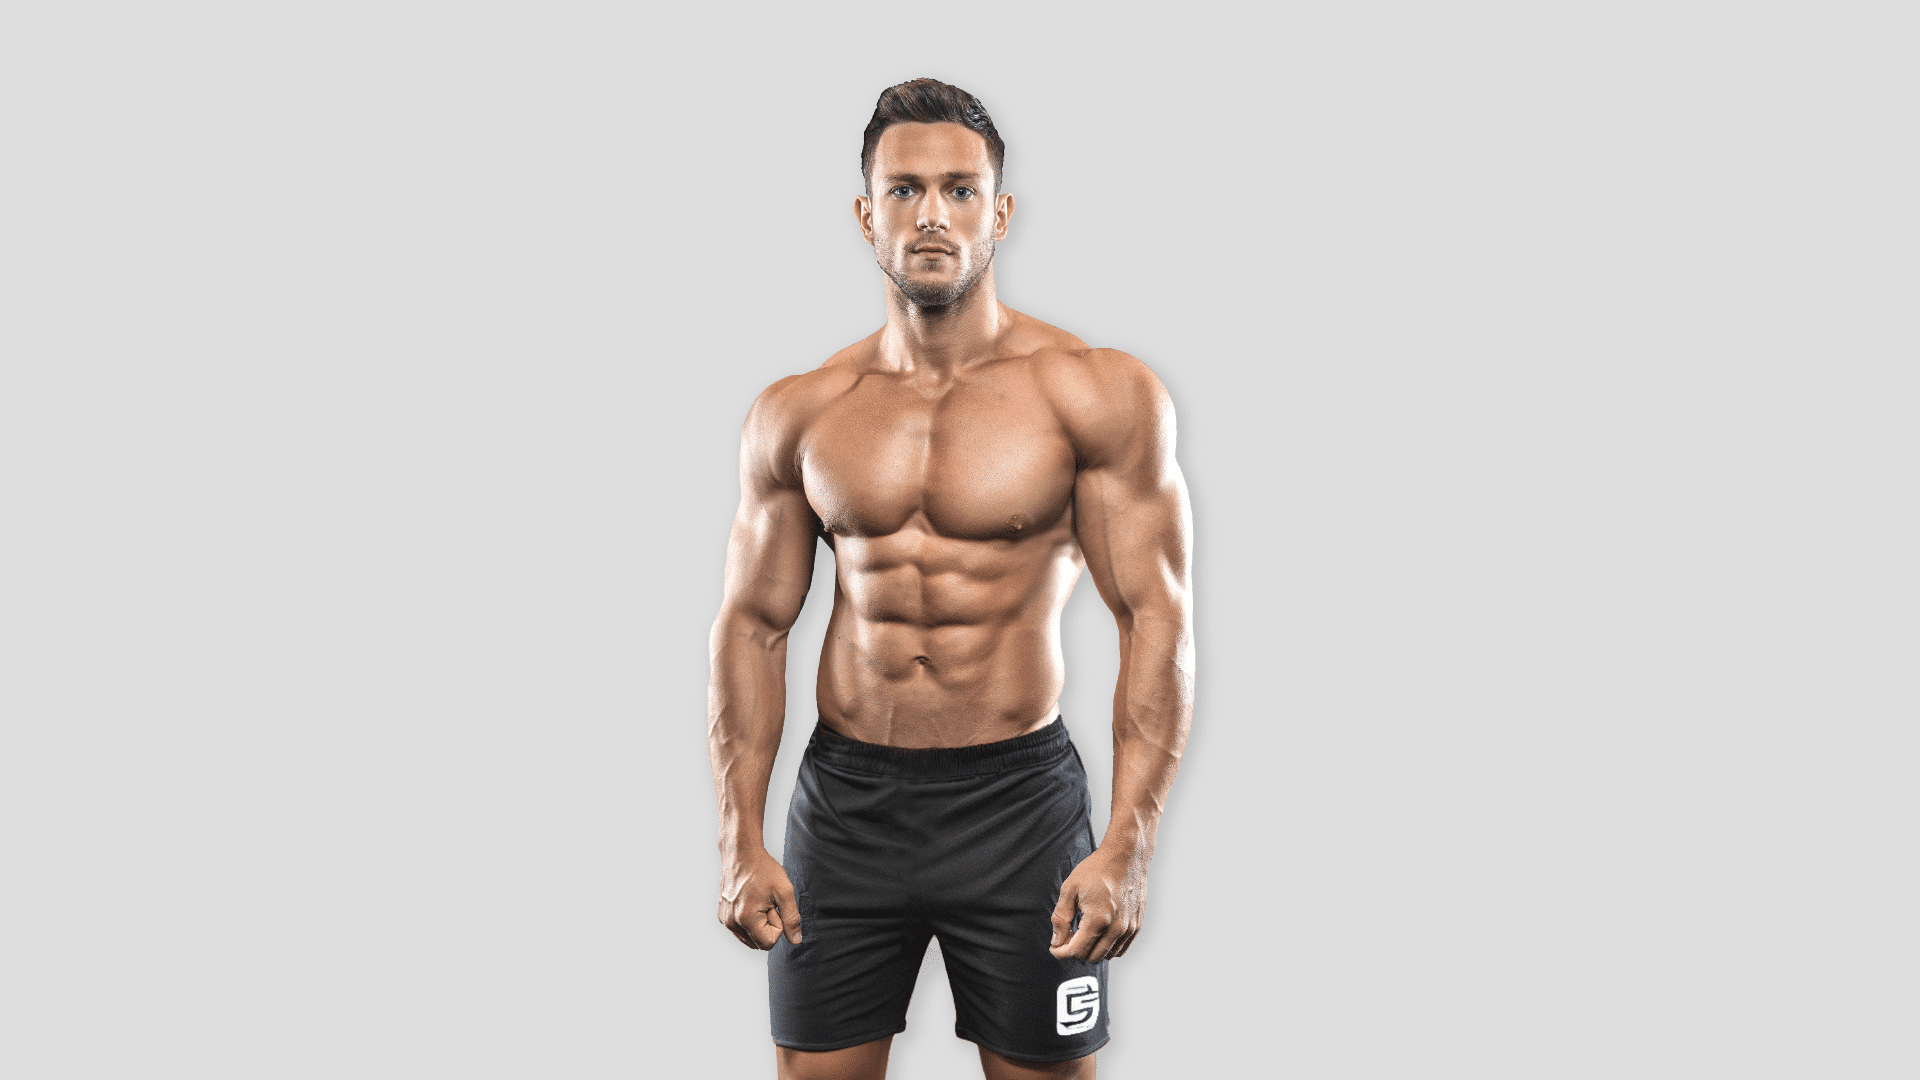 https://betterme.world/articles/wp-content/uploads/2020/09/What_Does_Calisthenics_Do_To_Your_Body_A_Blow_By_Blow_Explanation.png